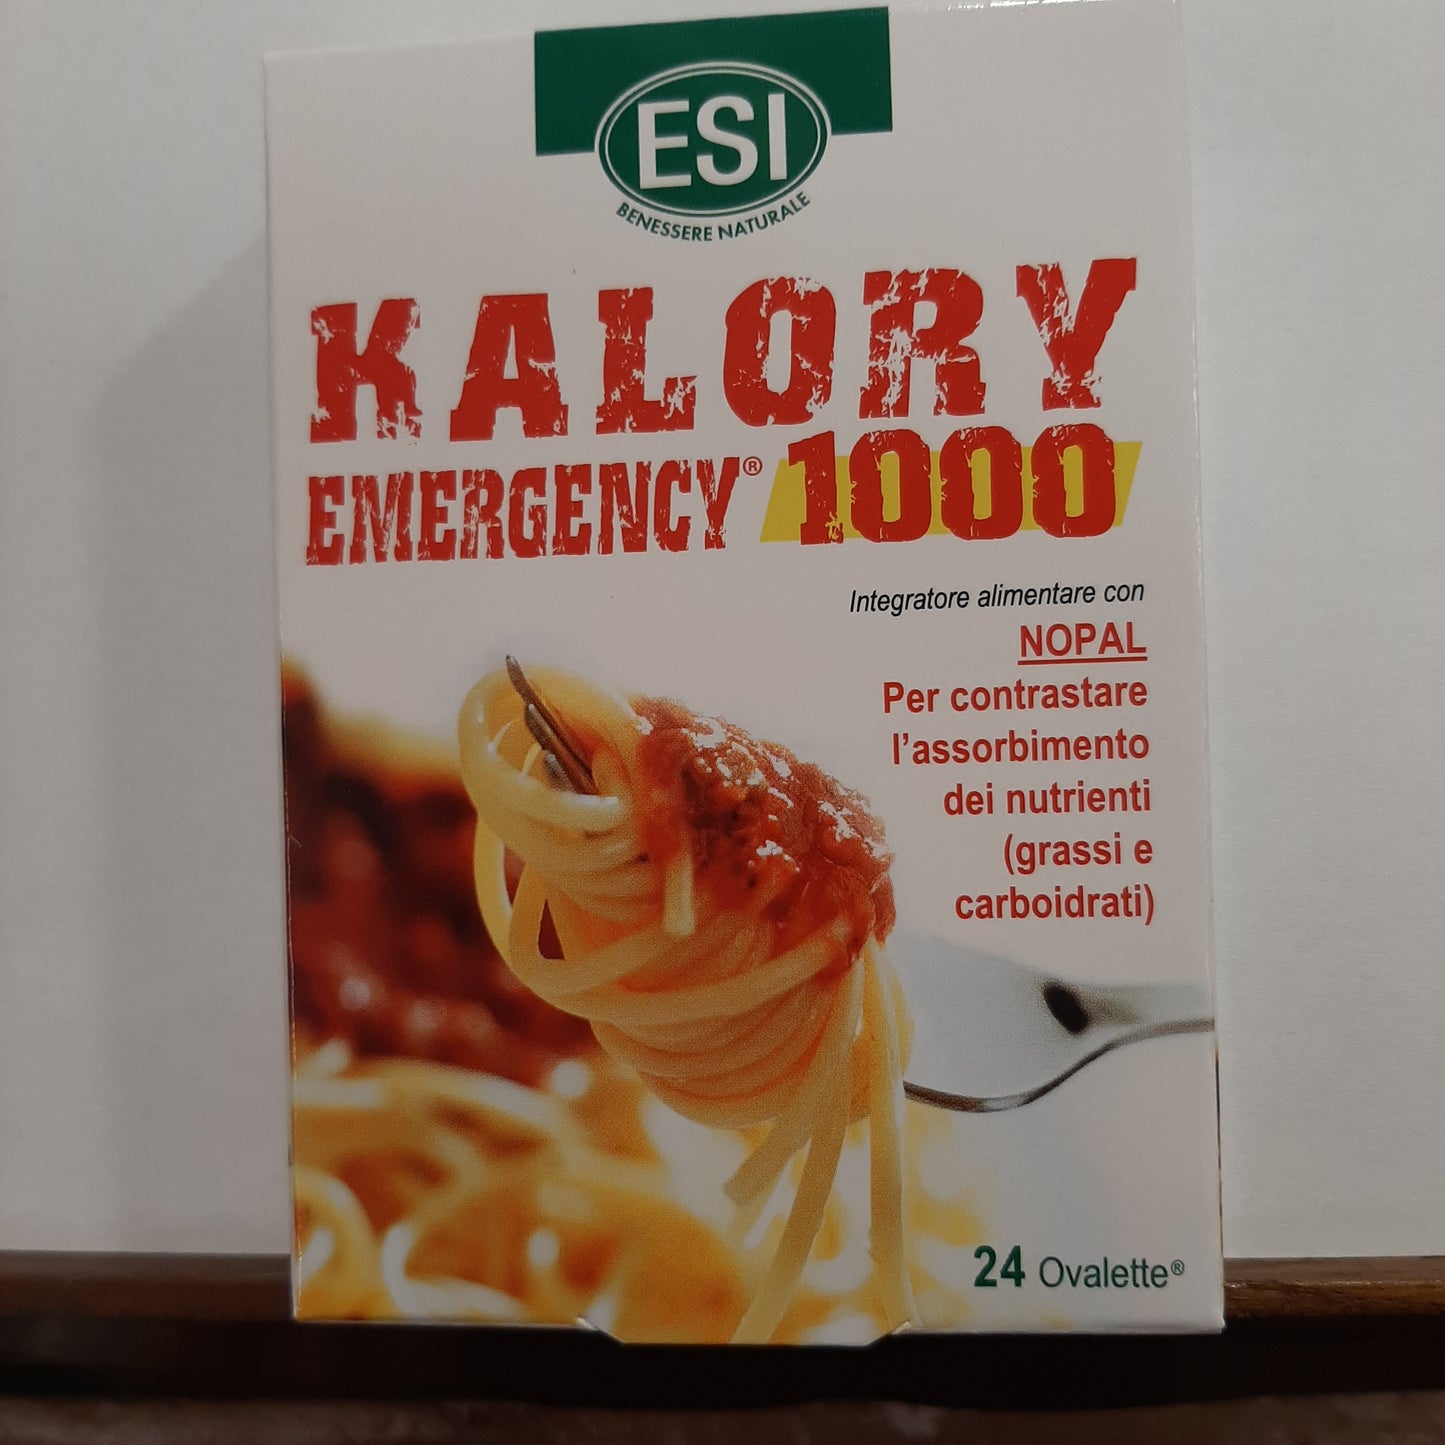 Food supplement with nopal Kalory emergency 1000 g19.2 24 tablets expiry 04/2026 Esi 